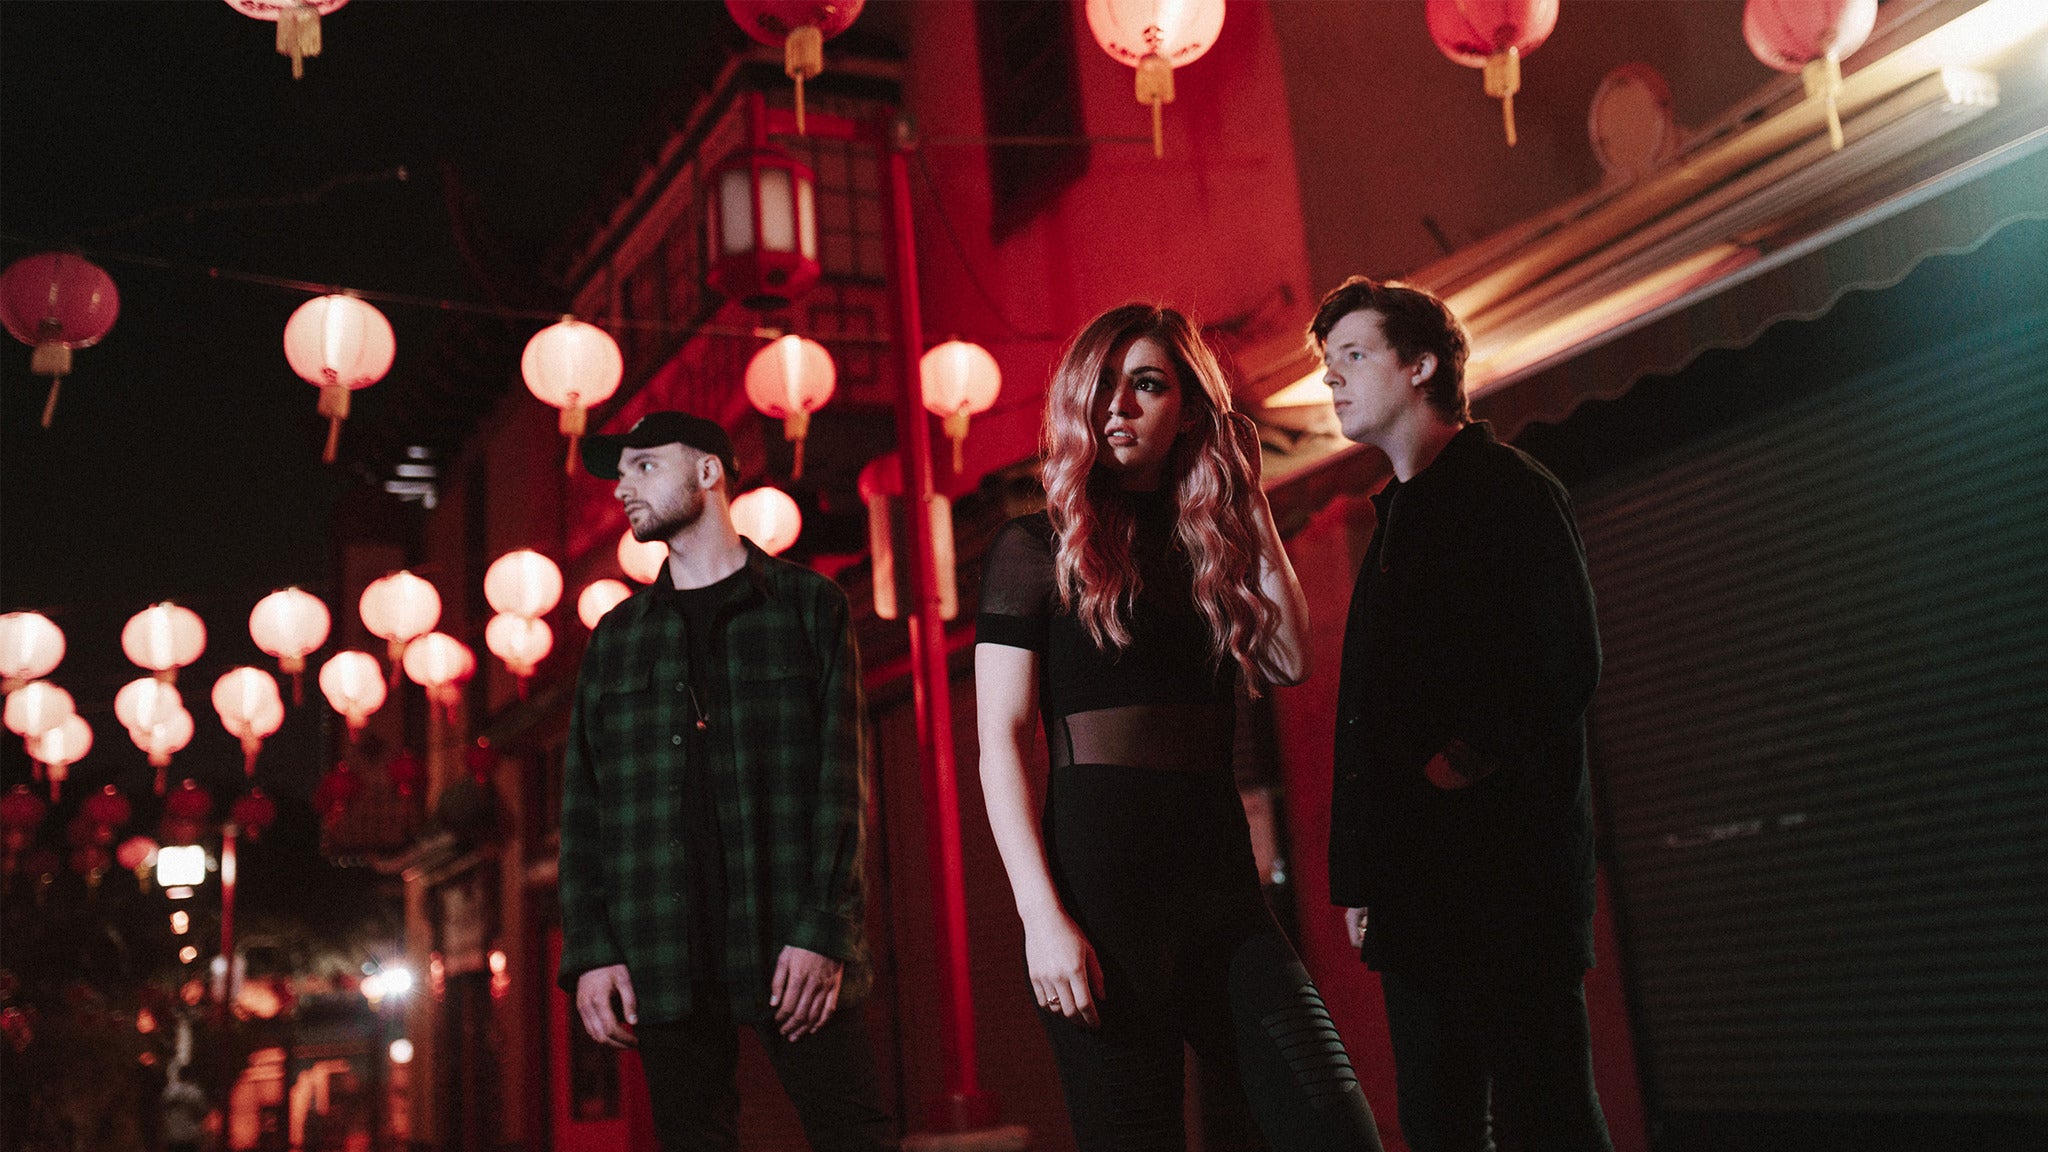 AGAINST THE CURRENT - Past Lives World Tour 2019 in New York promo photo for Citi® Cardmember presale offer code